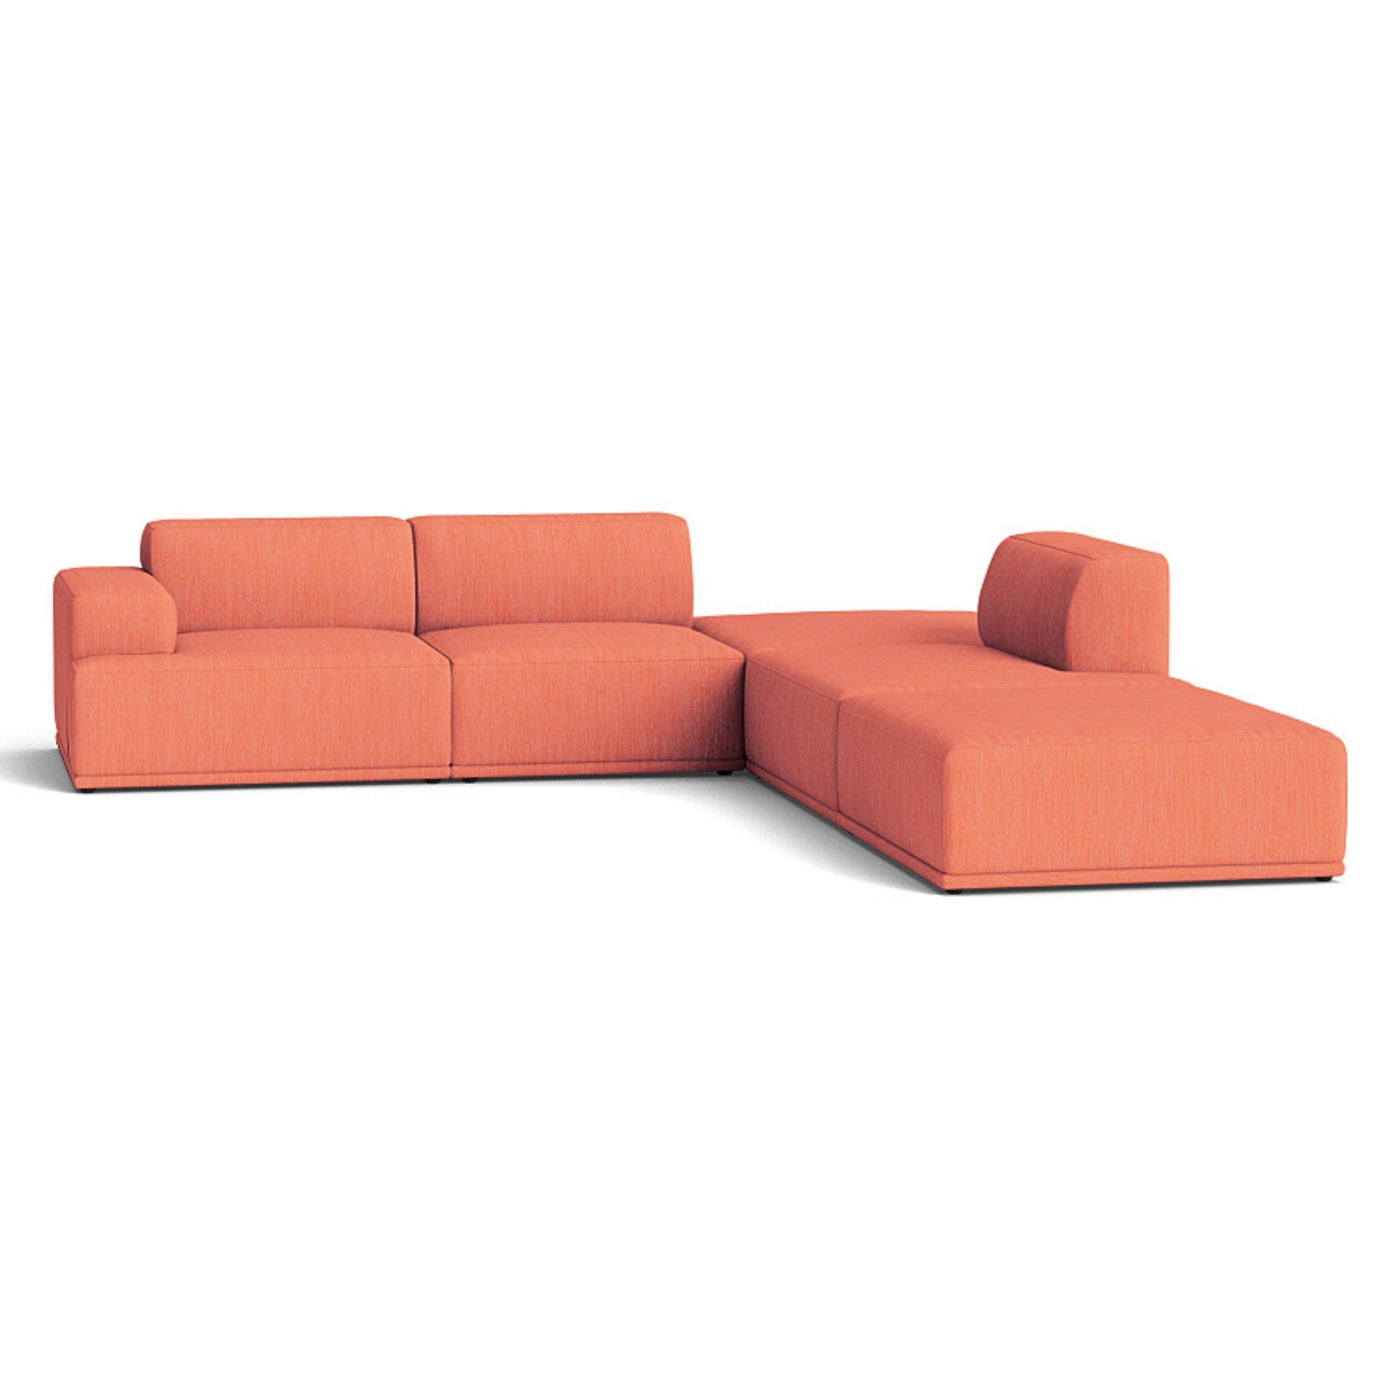 Muuto Connect Soft Modular Corner Sofa, configuration 3. made-to-order from someday designs. #colour_balder-542